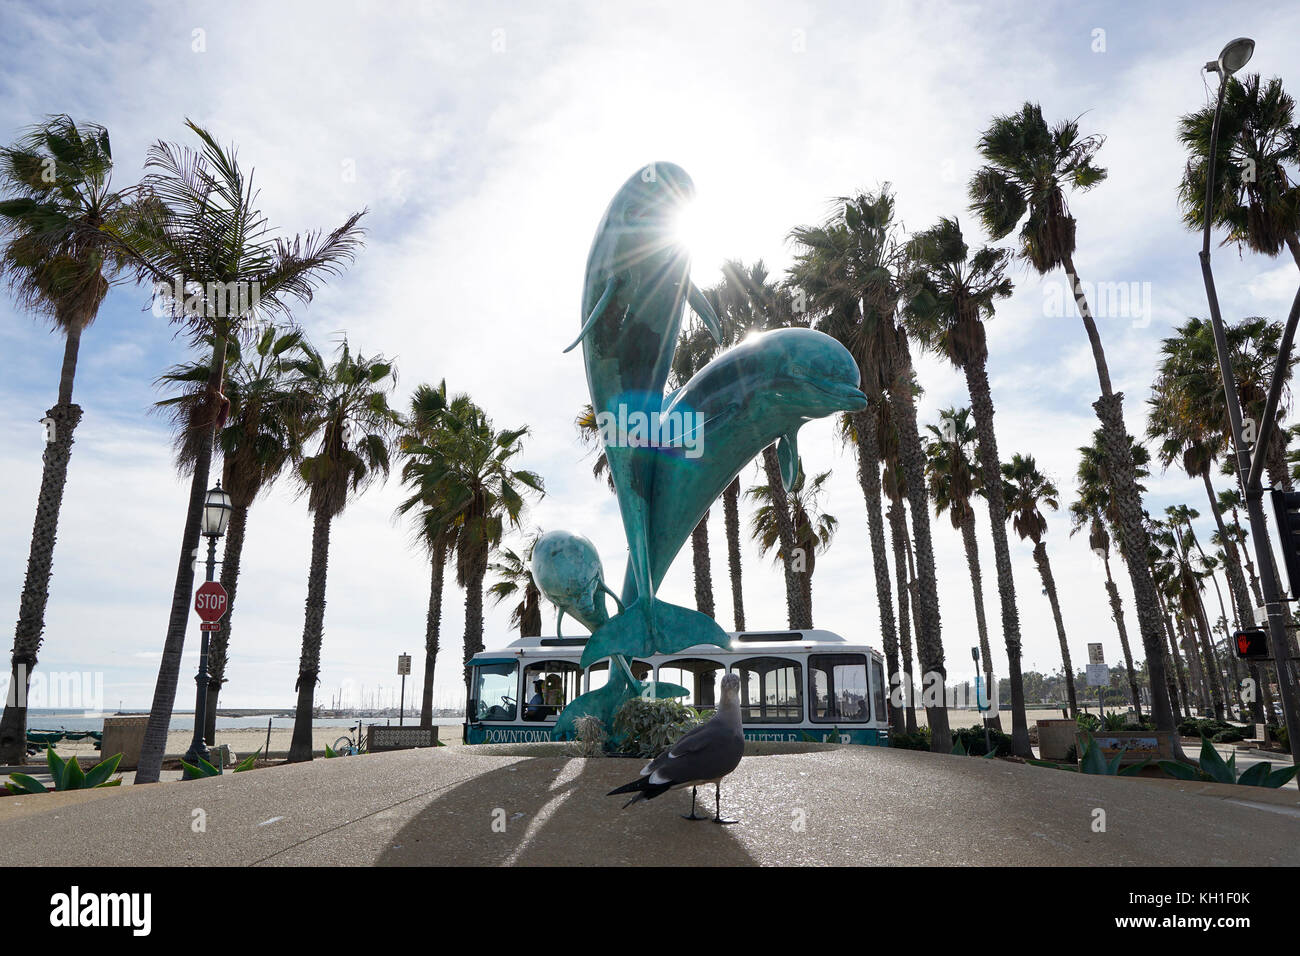 Dolphins icon of the sea jumping on fountain against palm trees and sun Stock Photo